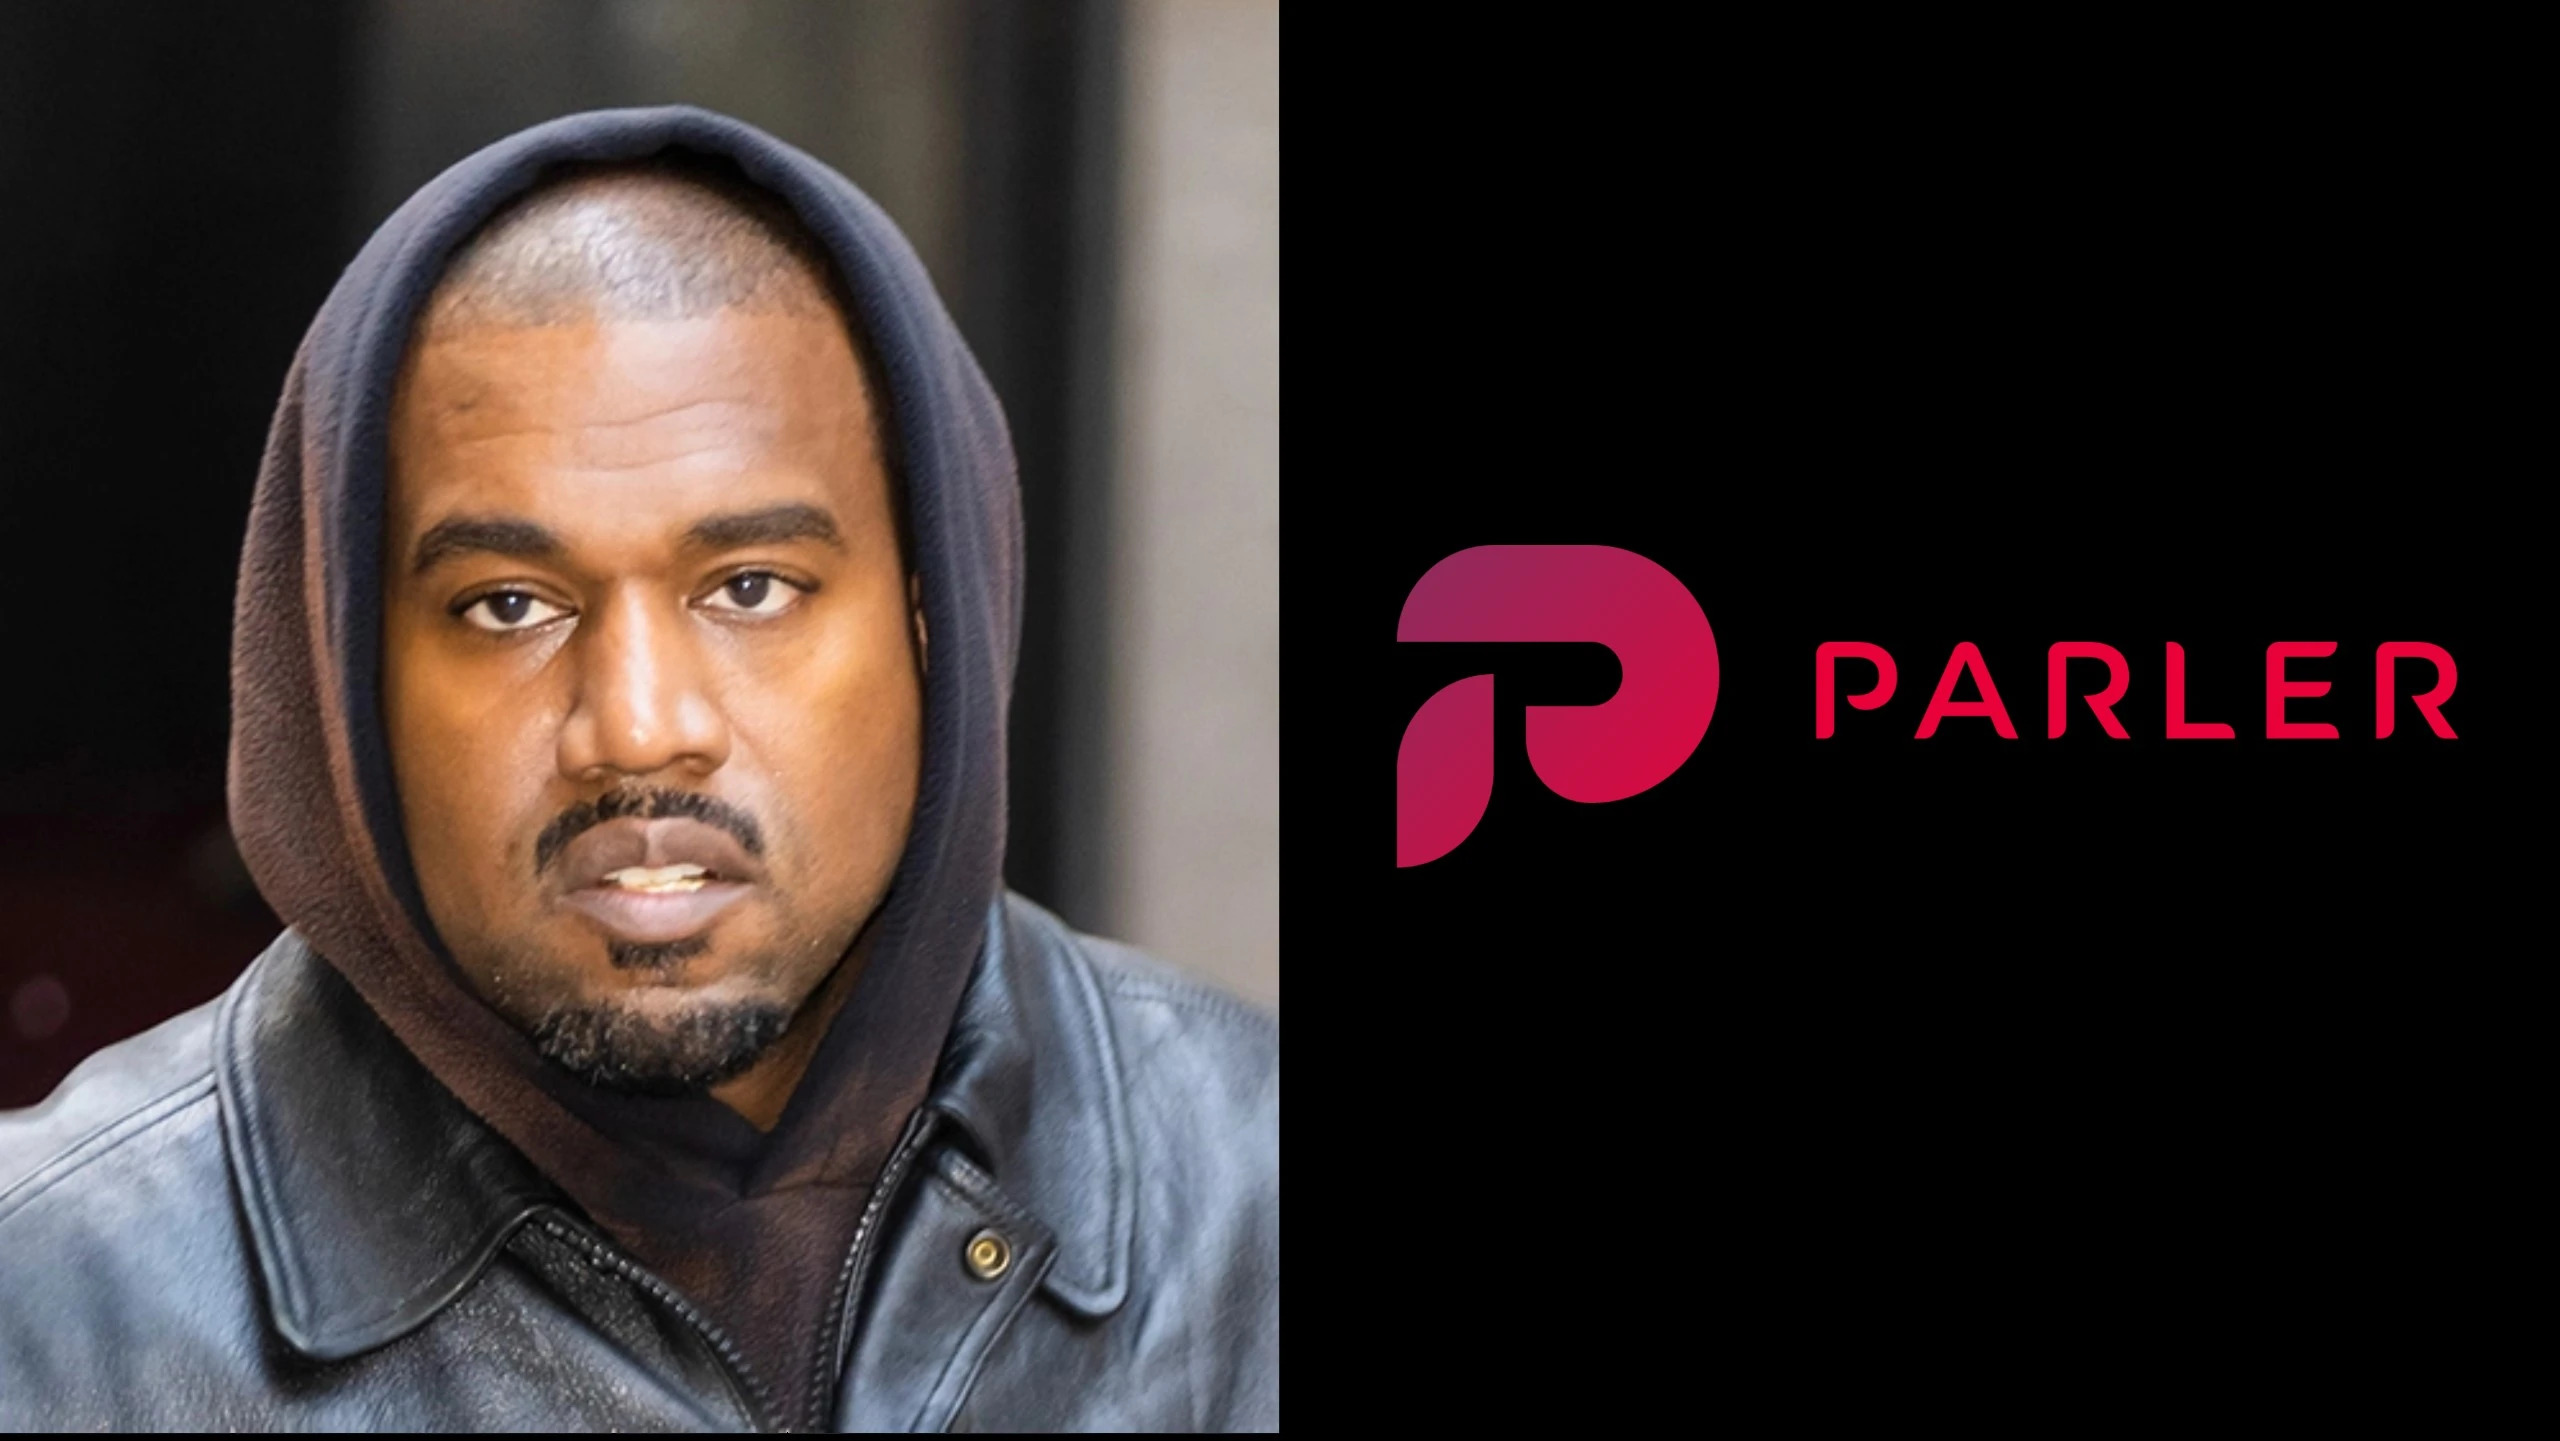 The Parler Deal With Kanye West Has Ended